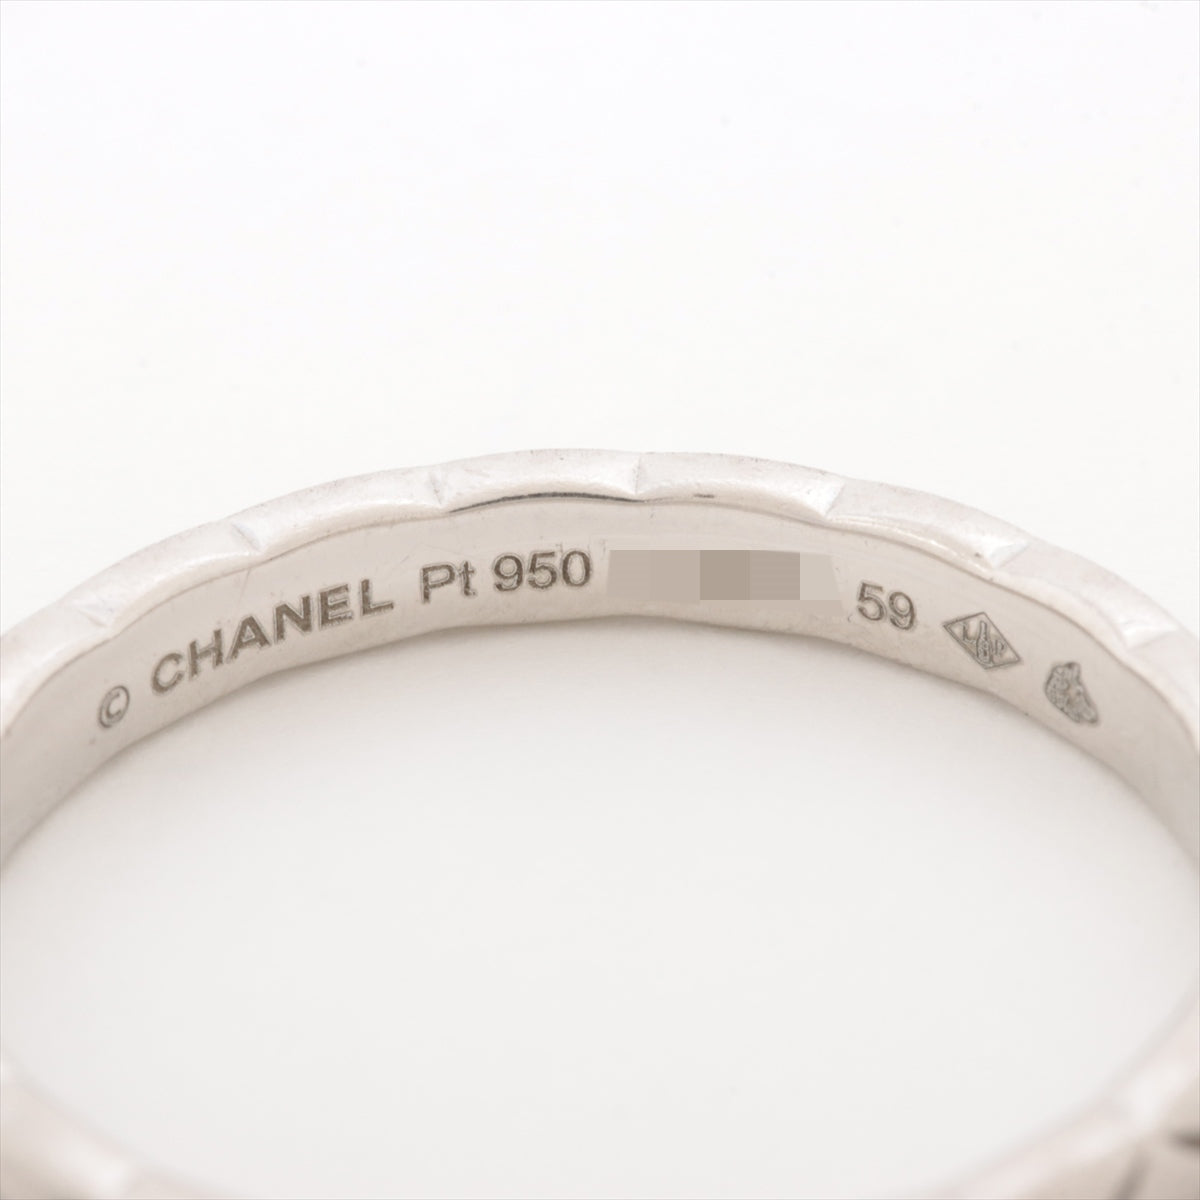 Chanel Coco Crush rings Pt950 4.8g 59 Initial